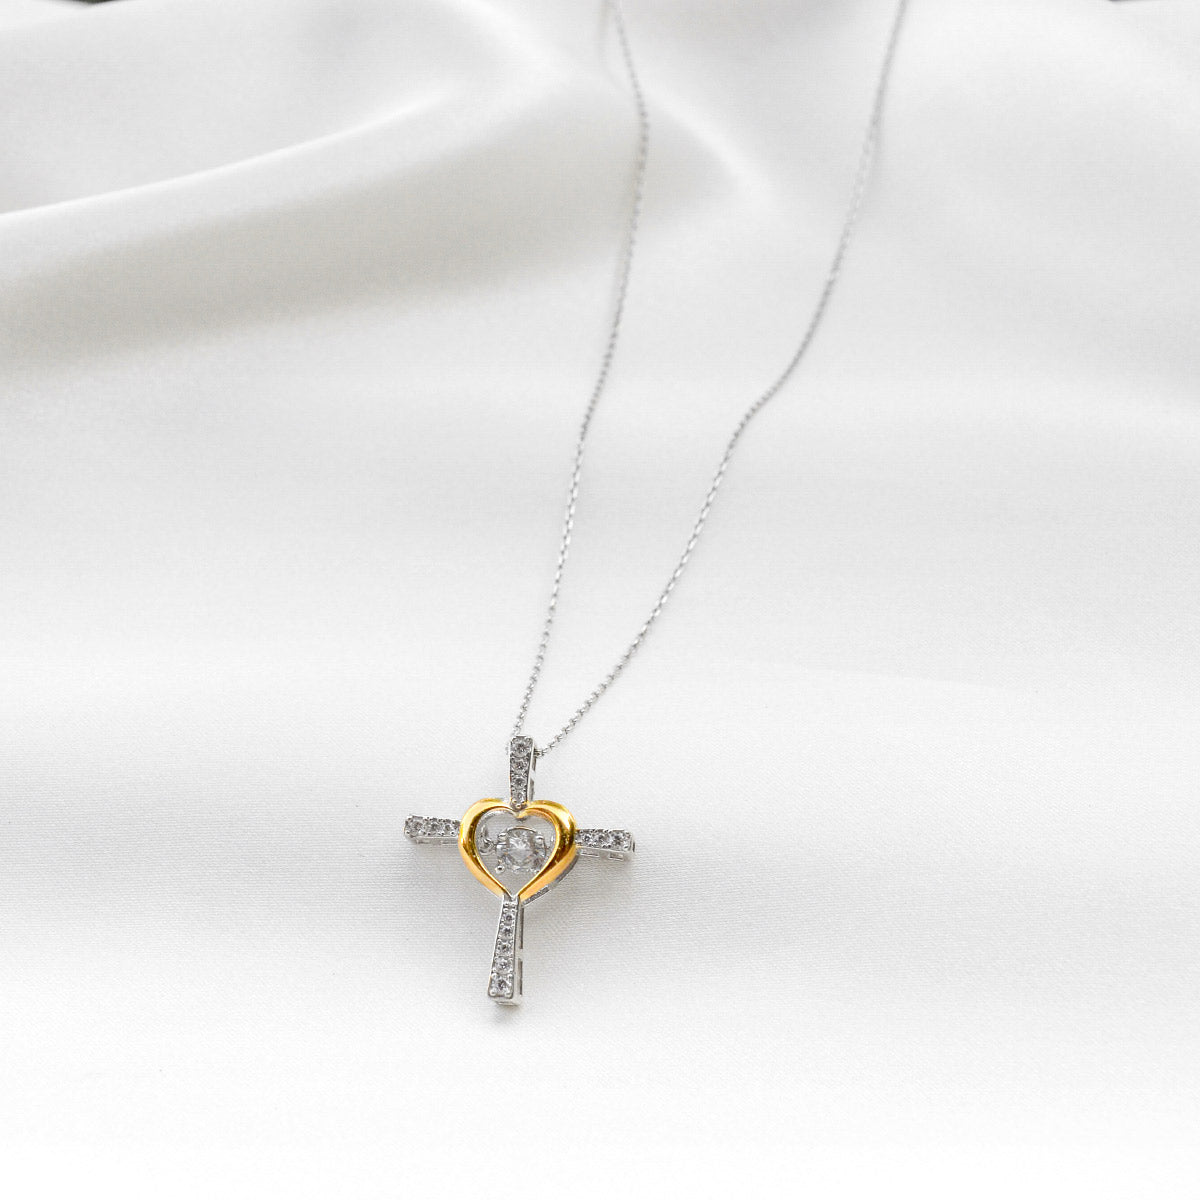 To My Wife, Love is Patient - Dancing Crystal Heart Cross Necklace Gift Set